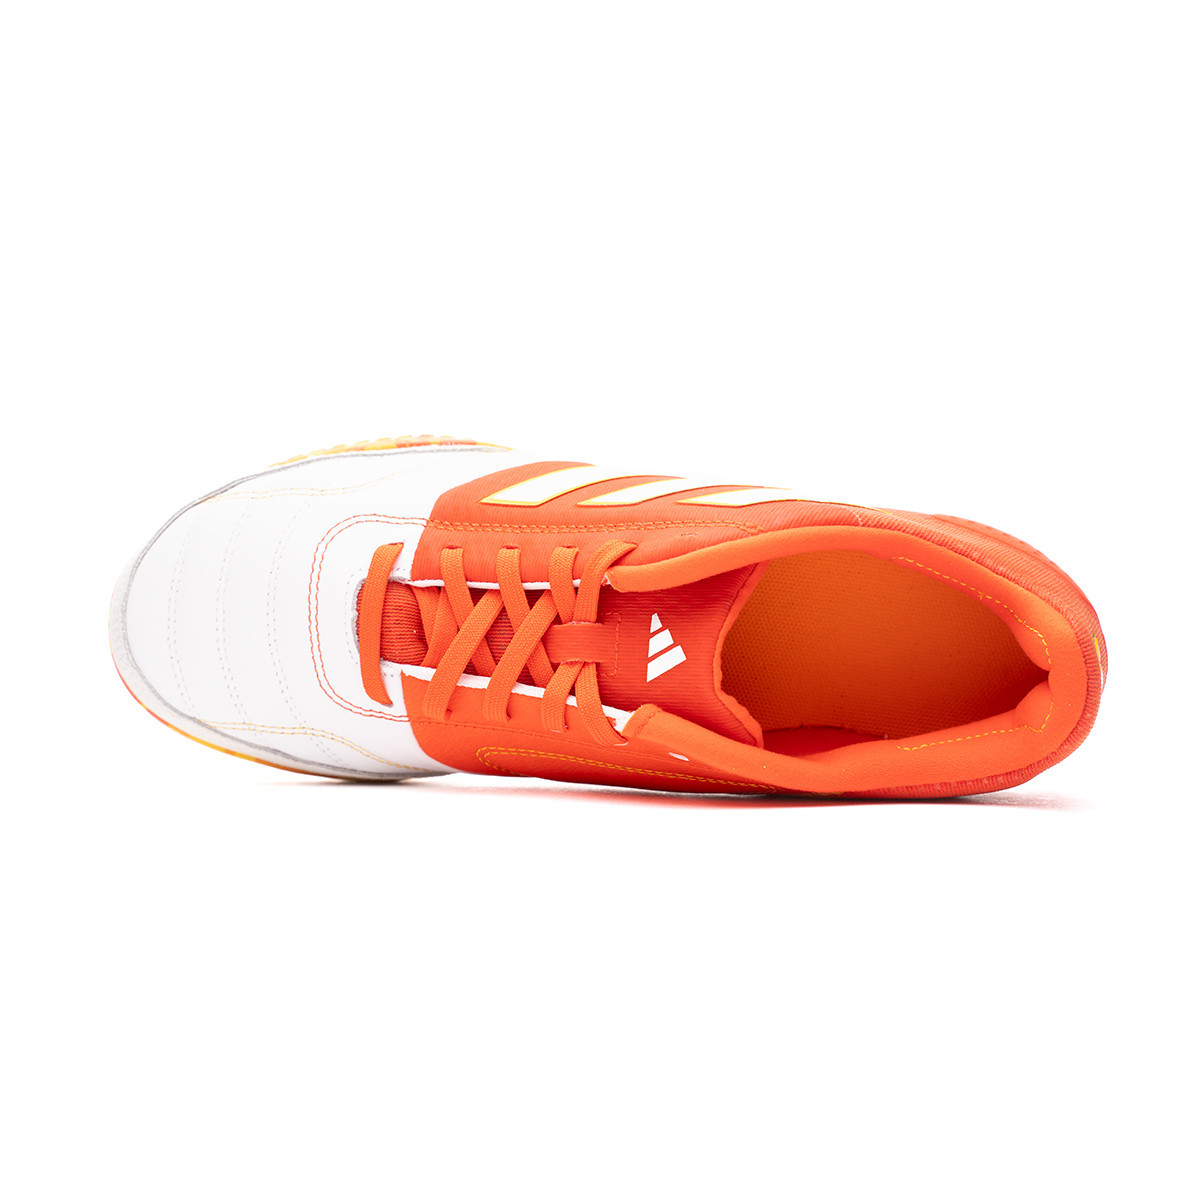 Indoor boots adidas Top Competition White-Bold Fútbol Orange-Ftwr Sala Gold - Emotion Bold